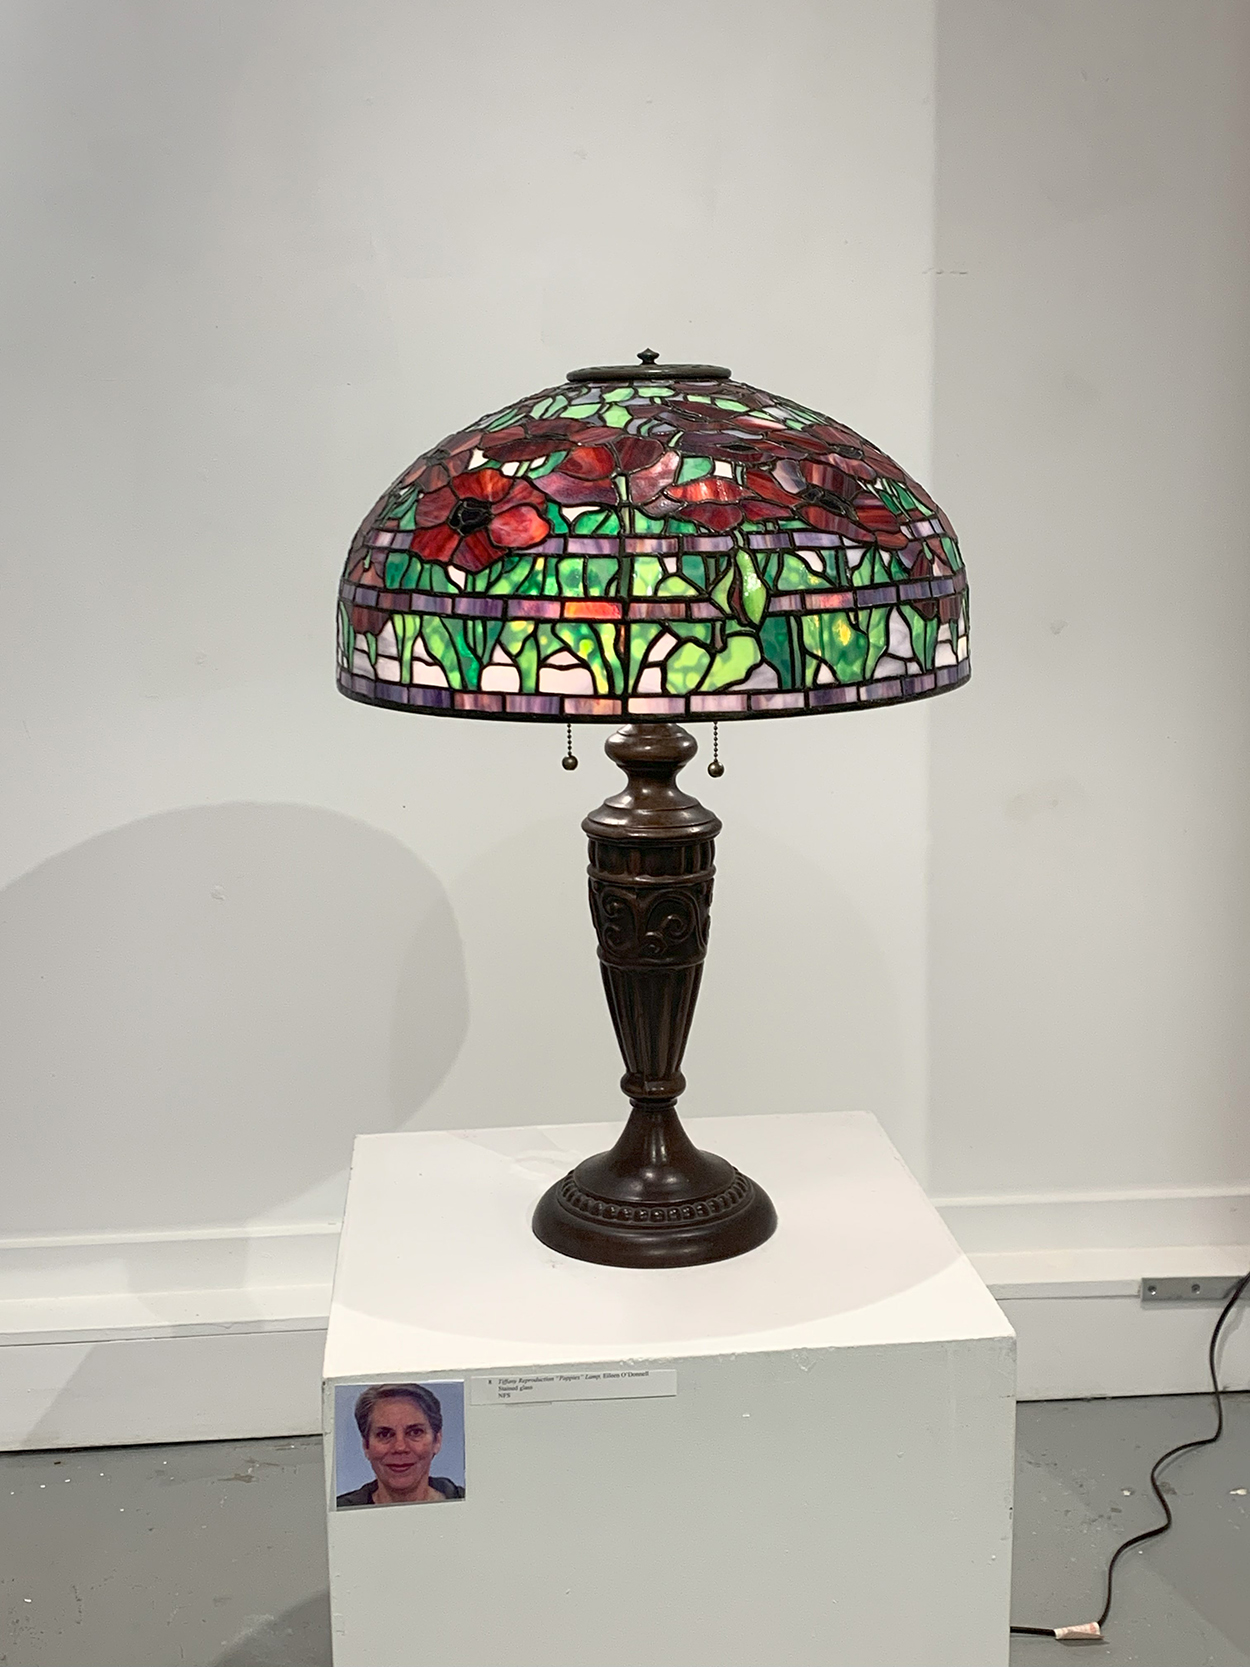 Tiffany Reproduction “Poppies” Lamp, Eileen O’Donnell